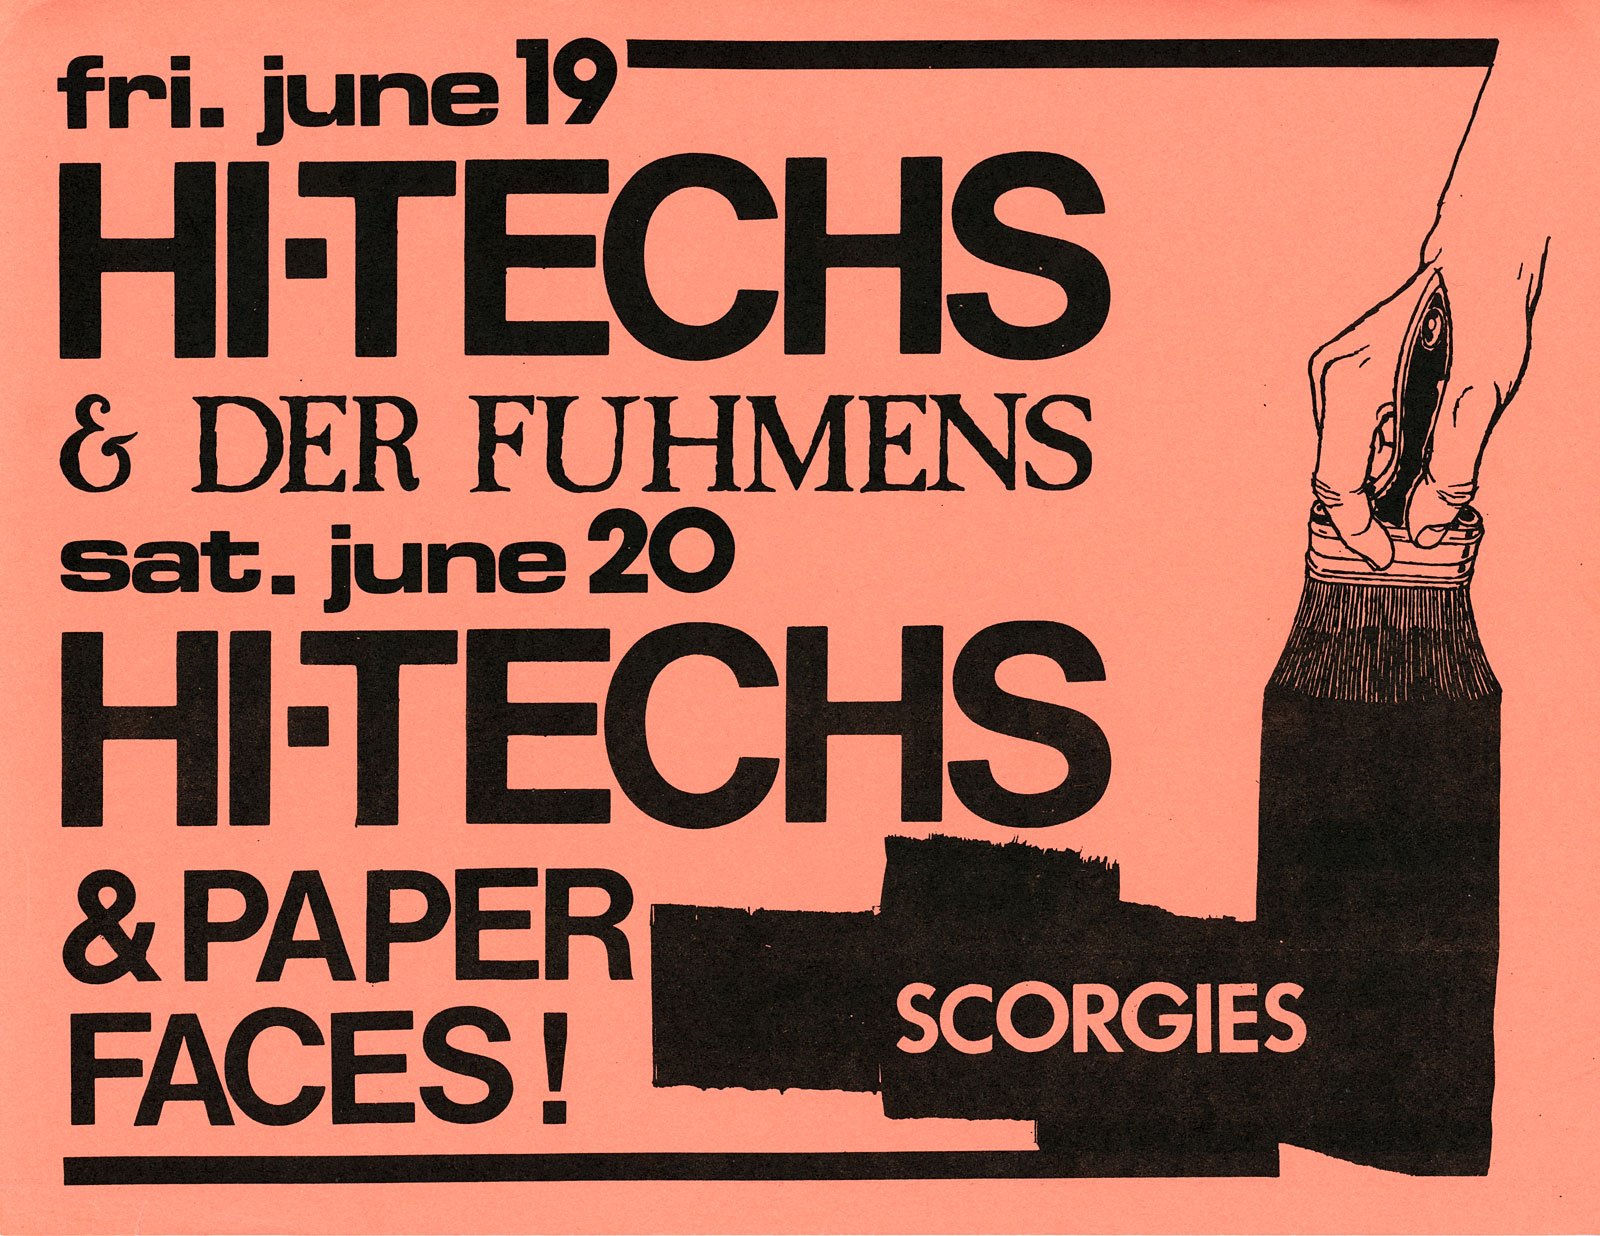 Poster for Hi-Techs with Der Fuhmens at Scorgie's on Friday 06.20.1981 and Hi-Techs with Paper Faces on Saturday 06.21.1981